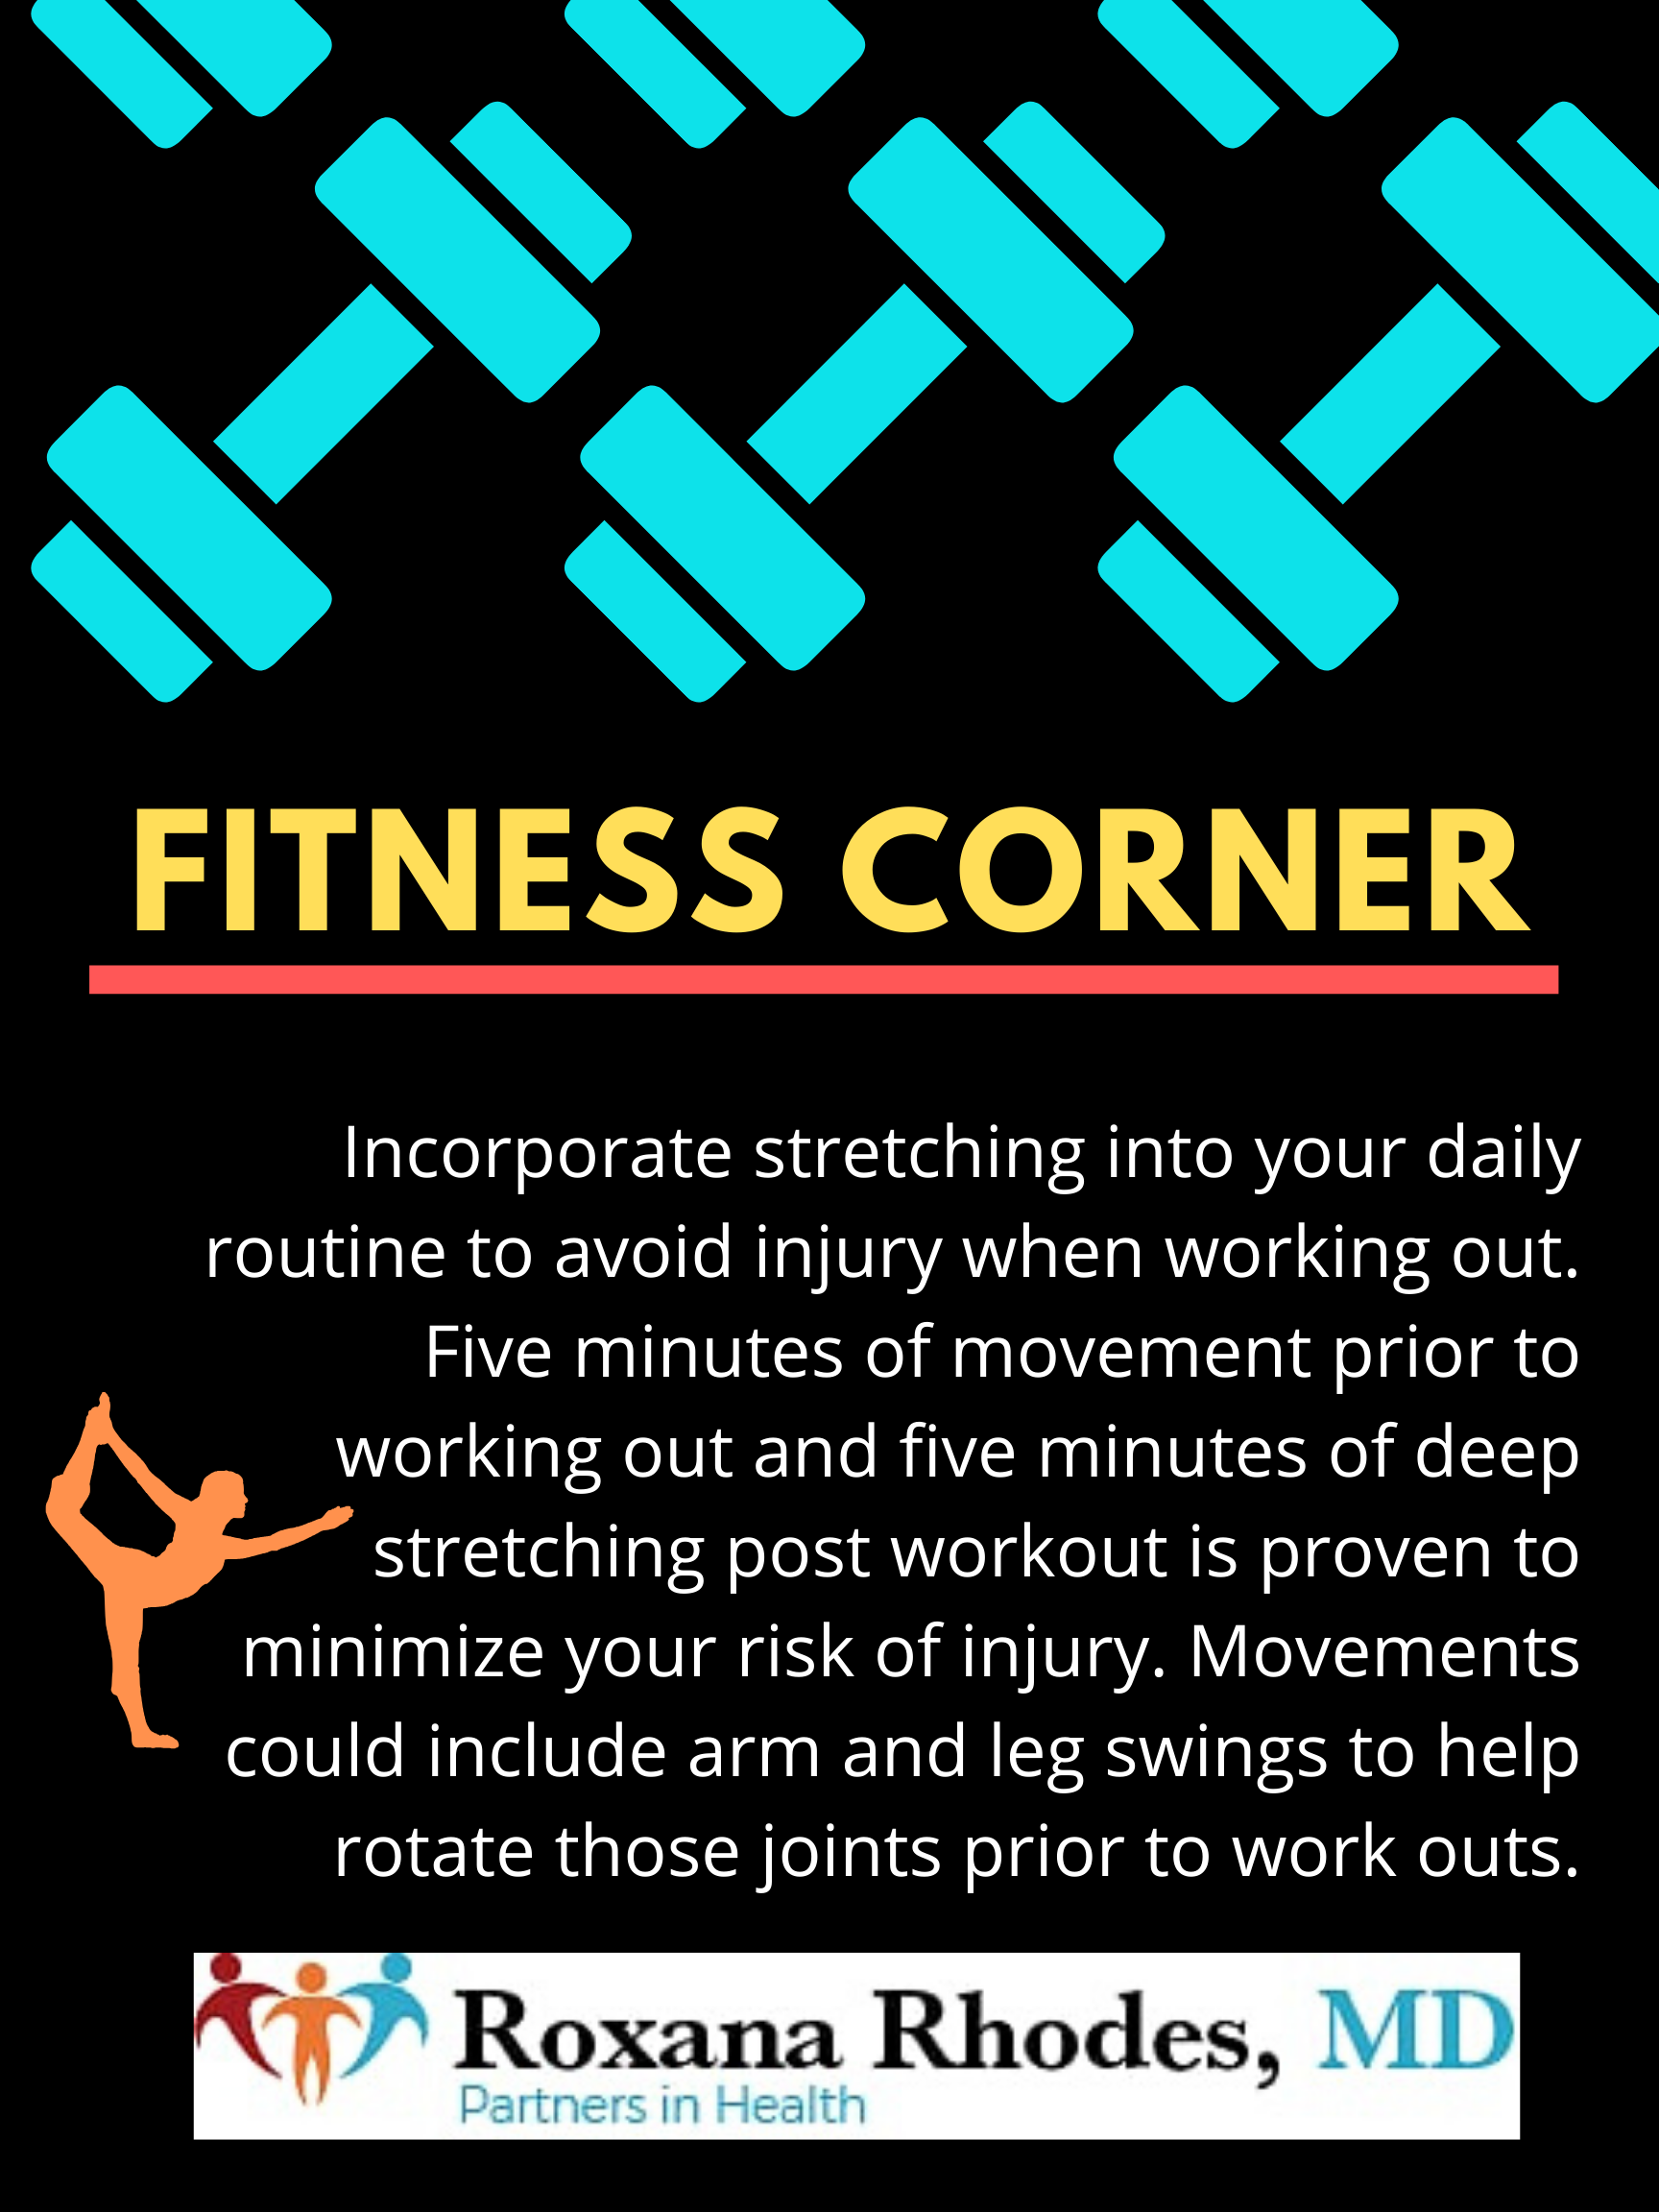 Monthly Fitness Tip from Partners in Health